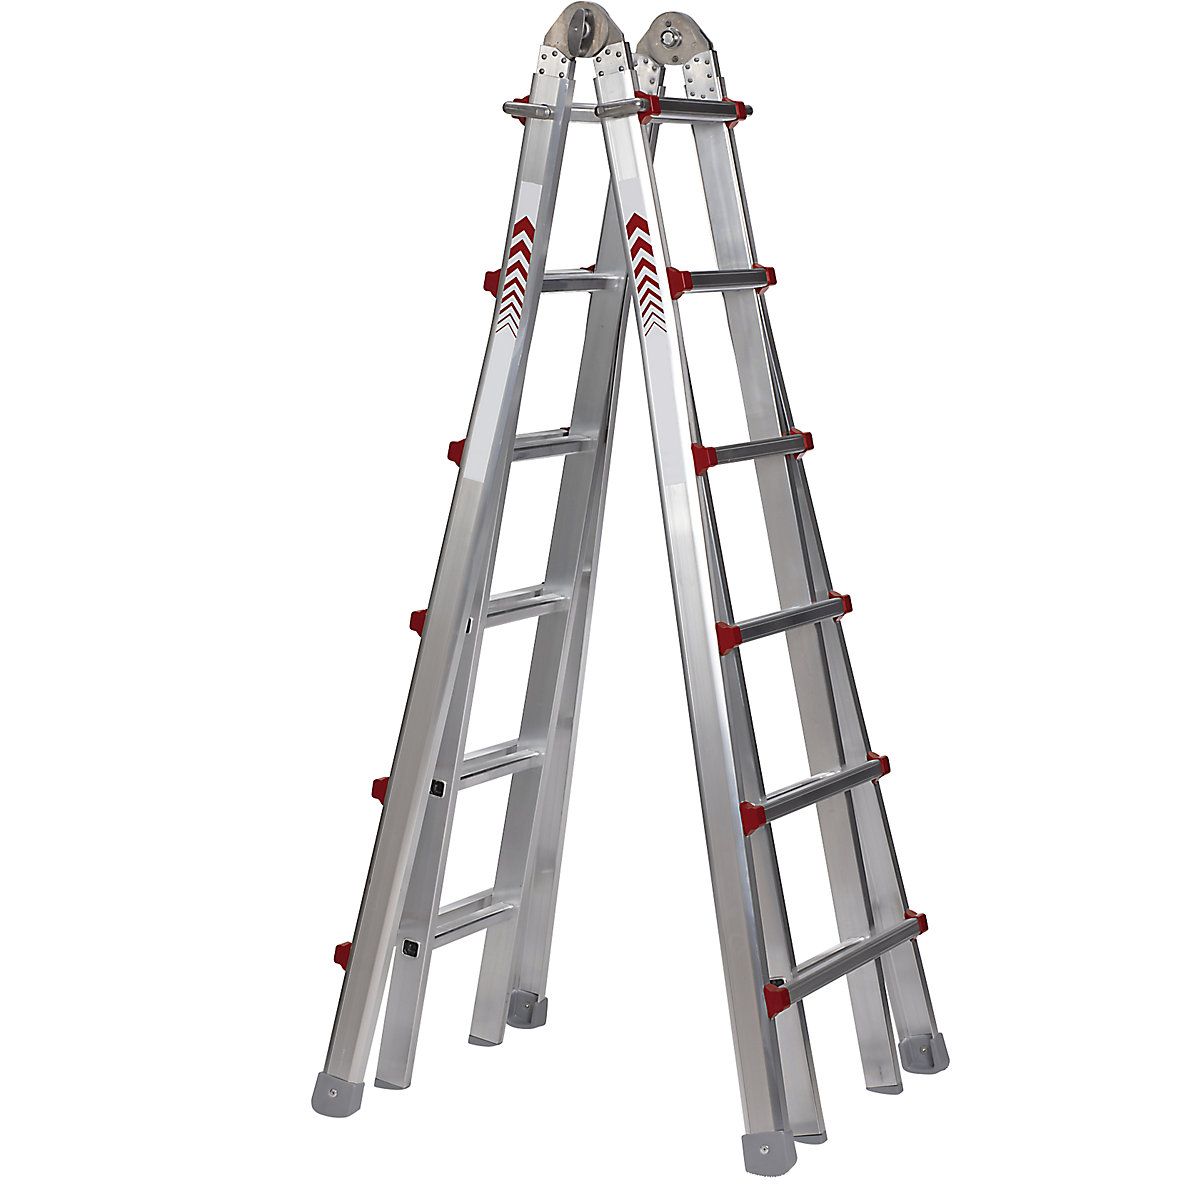 Telescopic folding ladder, stepladder, lean-to ladder and stair ladder in one, 4 x 6 rungs-16